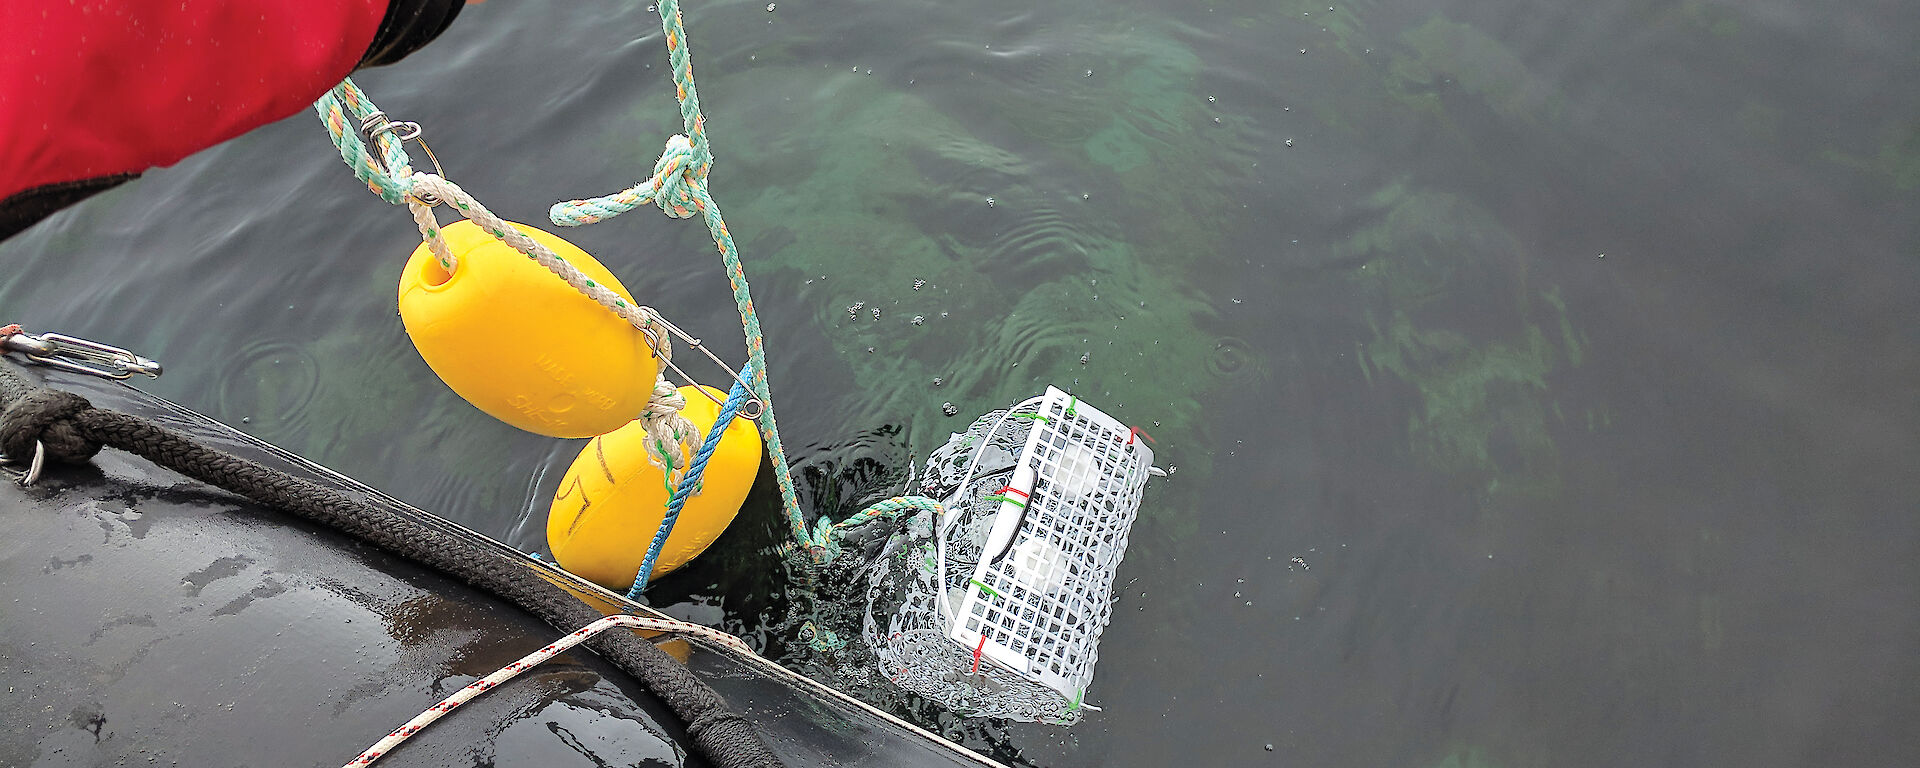 A basket containing marine DGT probes being lowered into the ocean.